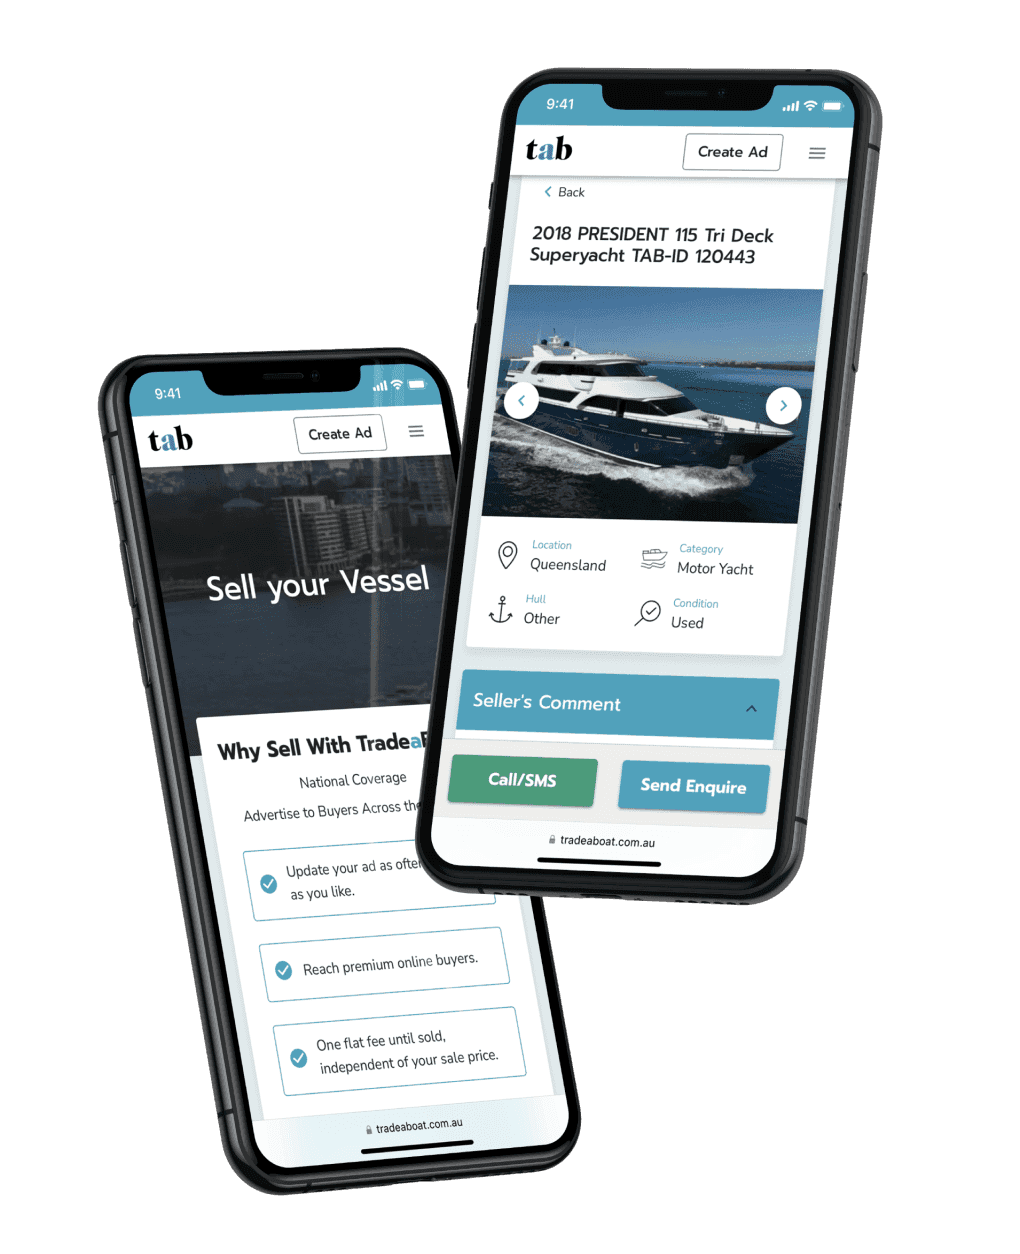 This Australian online platform facilitates the buying and selling of new or pre-owned boats and marine equipment. In addition, visitors to the site can explore engaging and educational content related to boat sales.